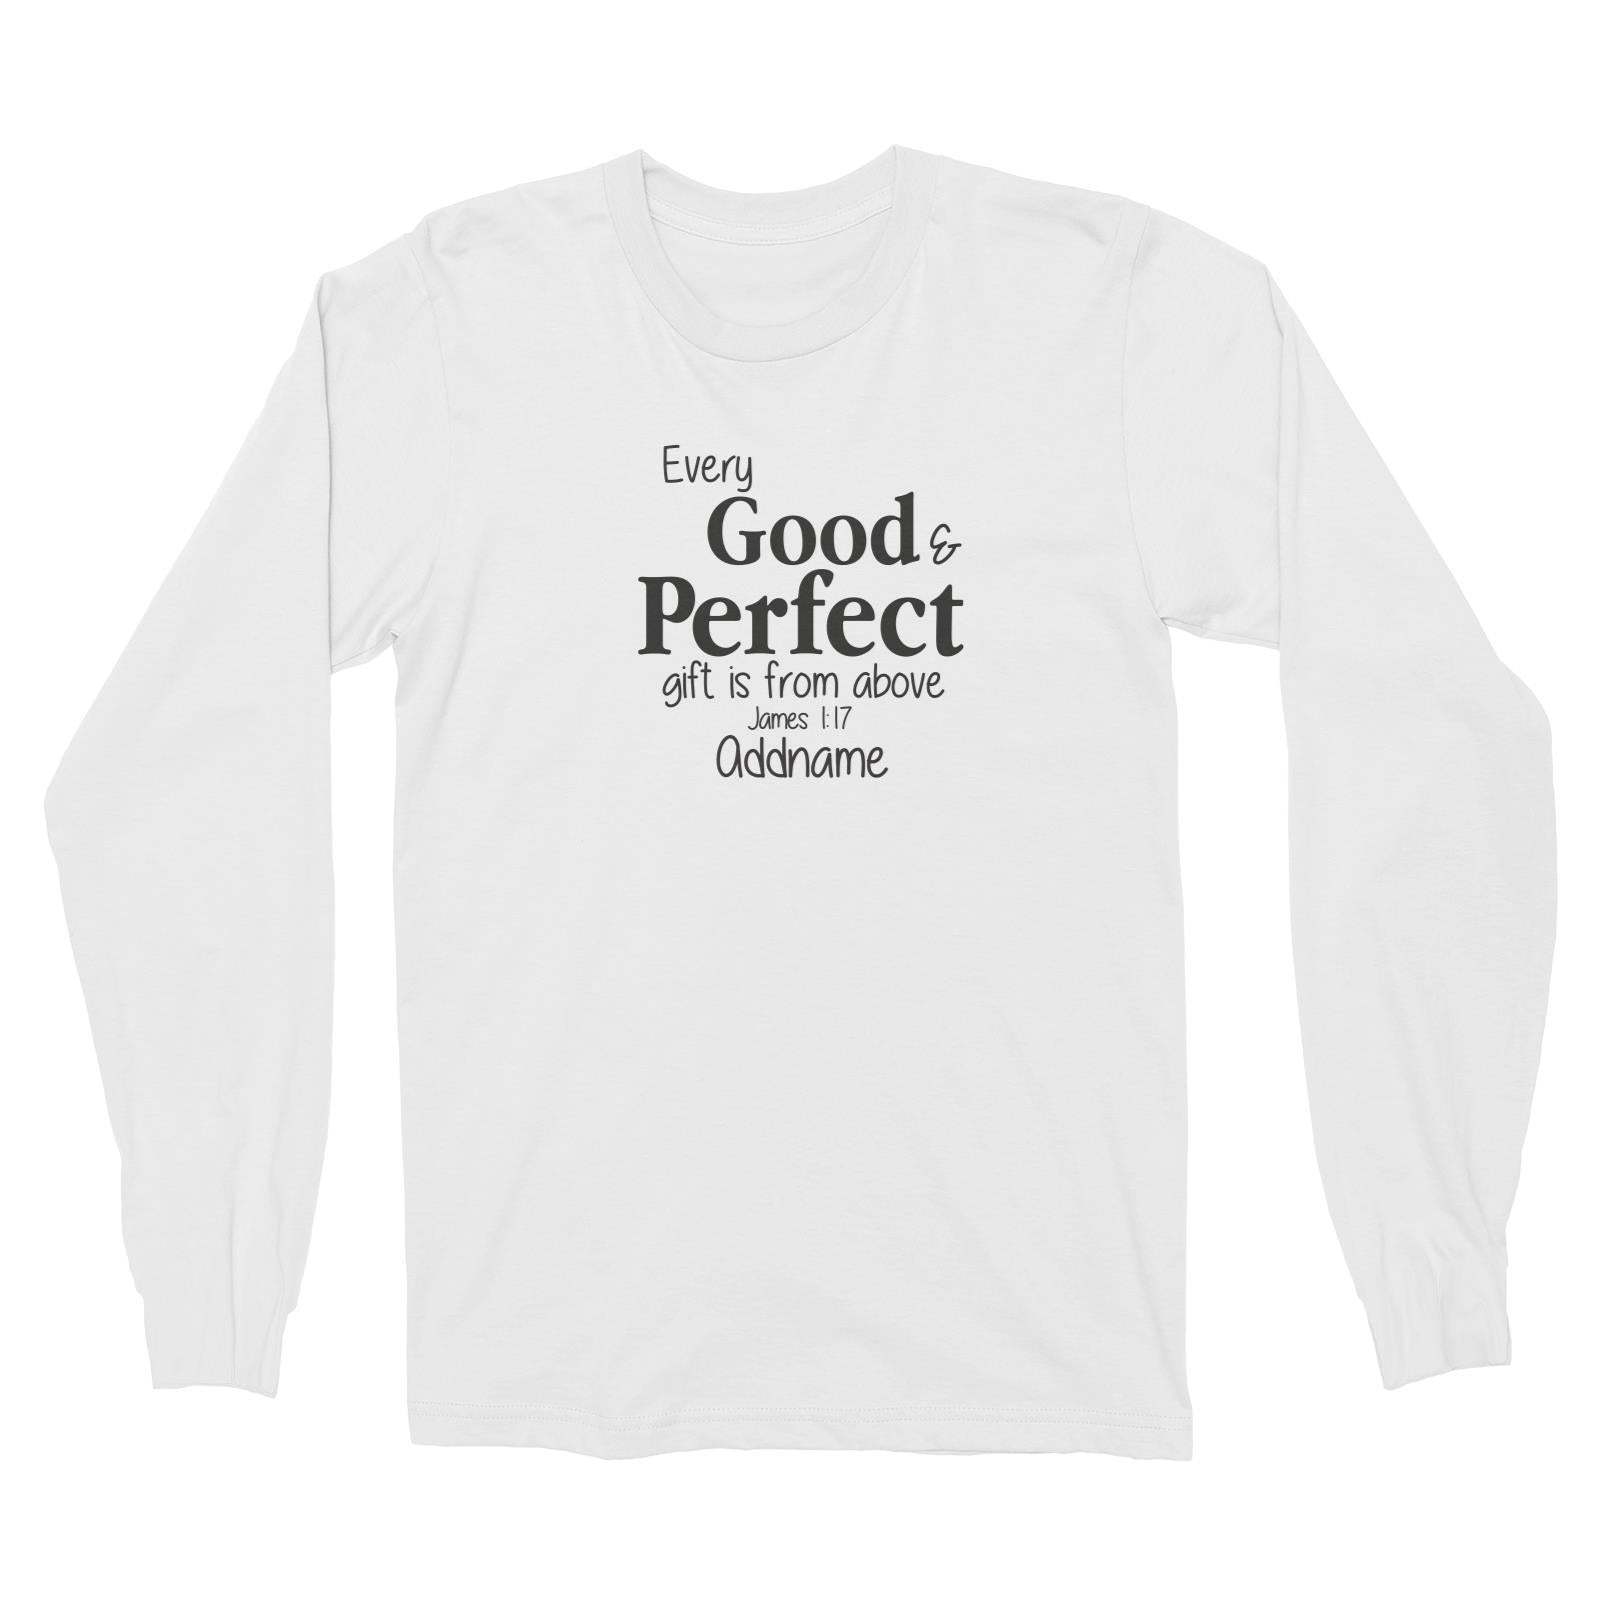 Christ Newborn Every Good and Perfect Gift is from Above James 1.17 Addname Long Sleeve Unisex T-Shirt